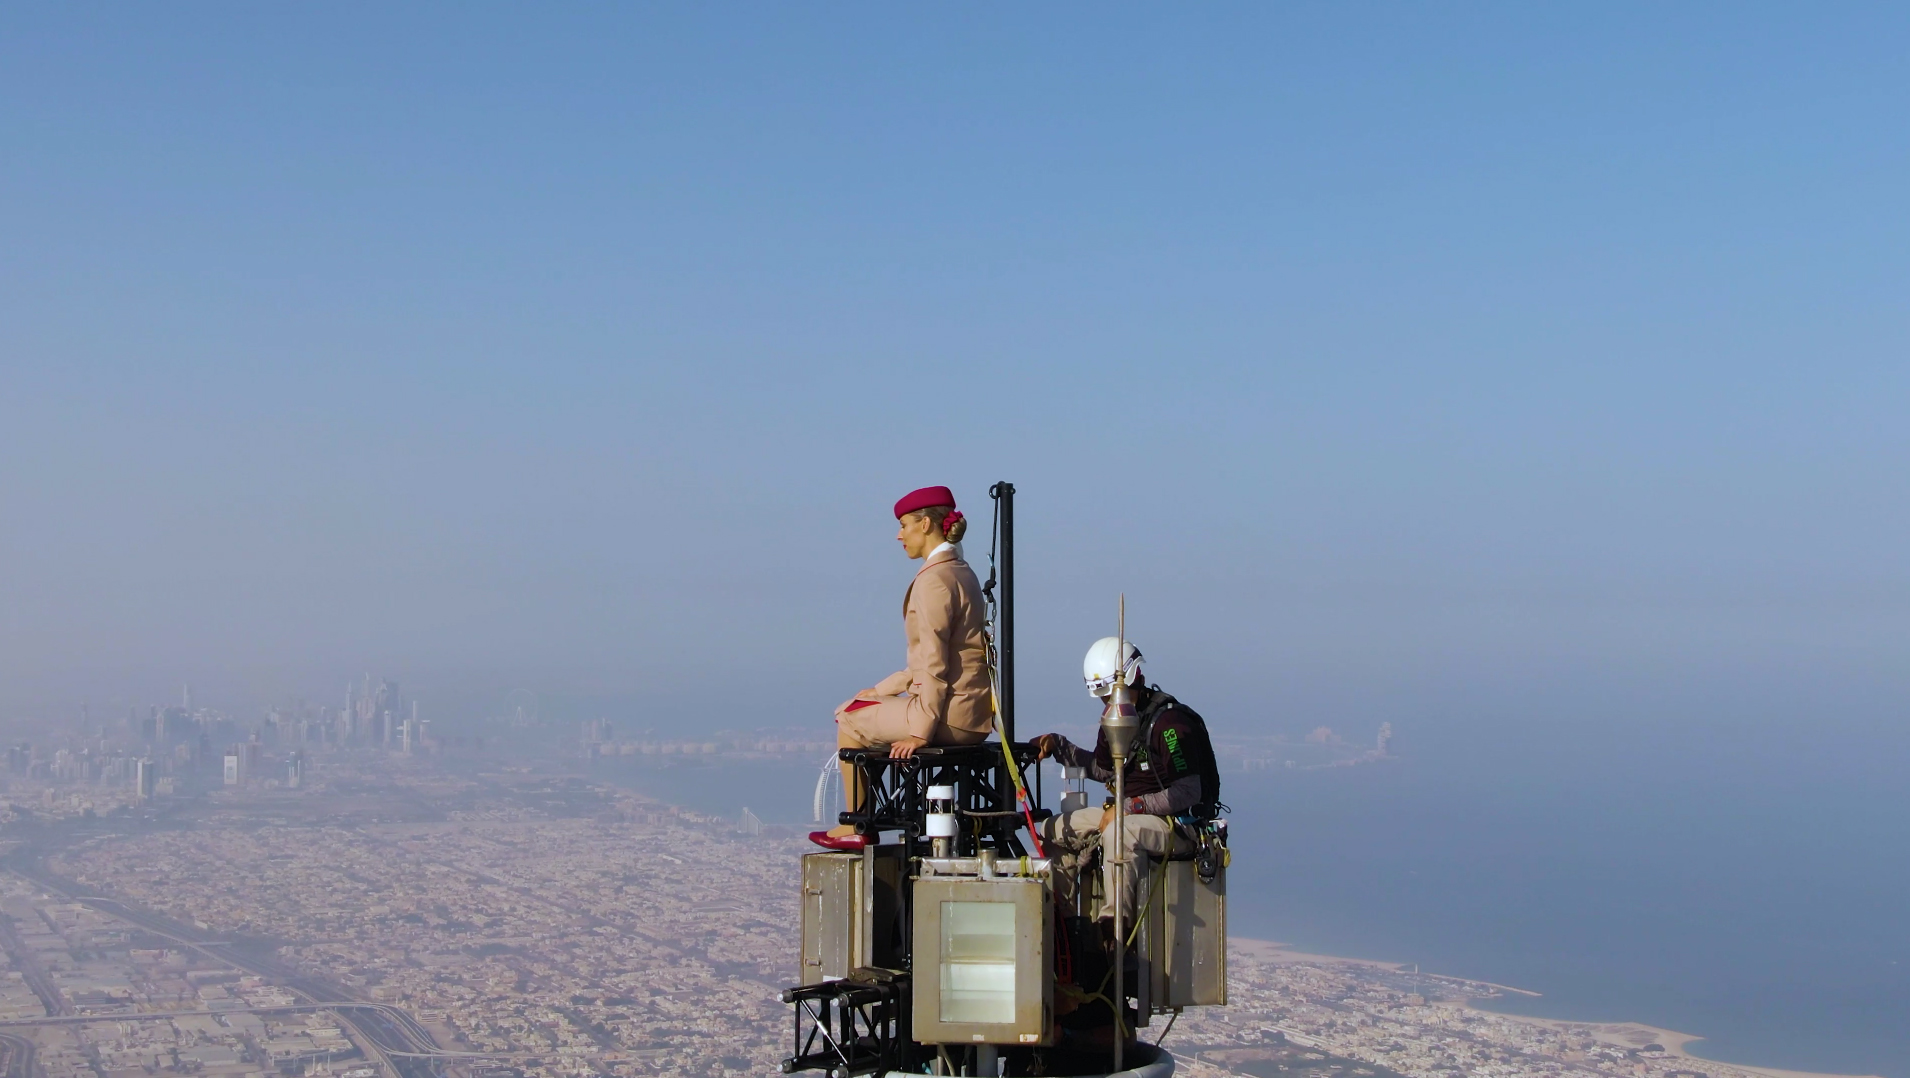 Behind the Scenes of Emirates Commercial - We're At Top of the World